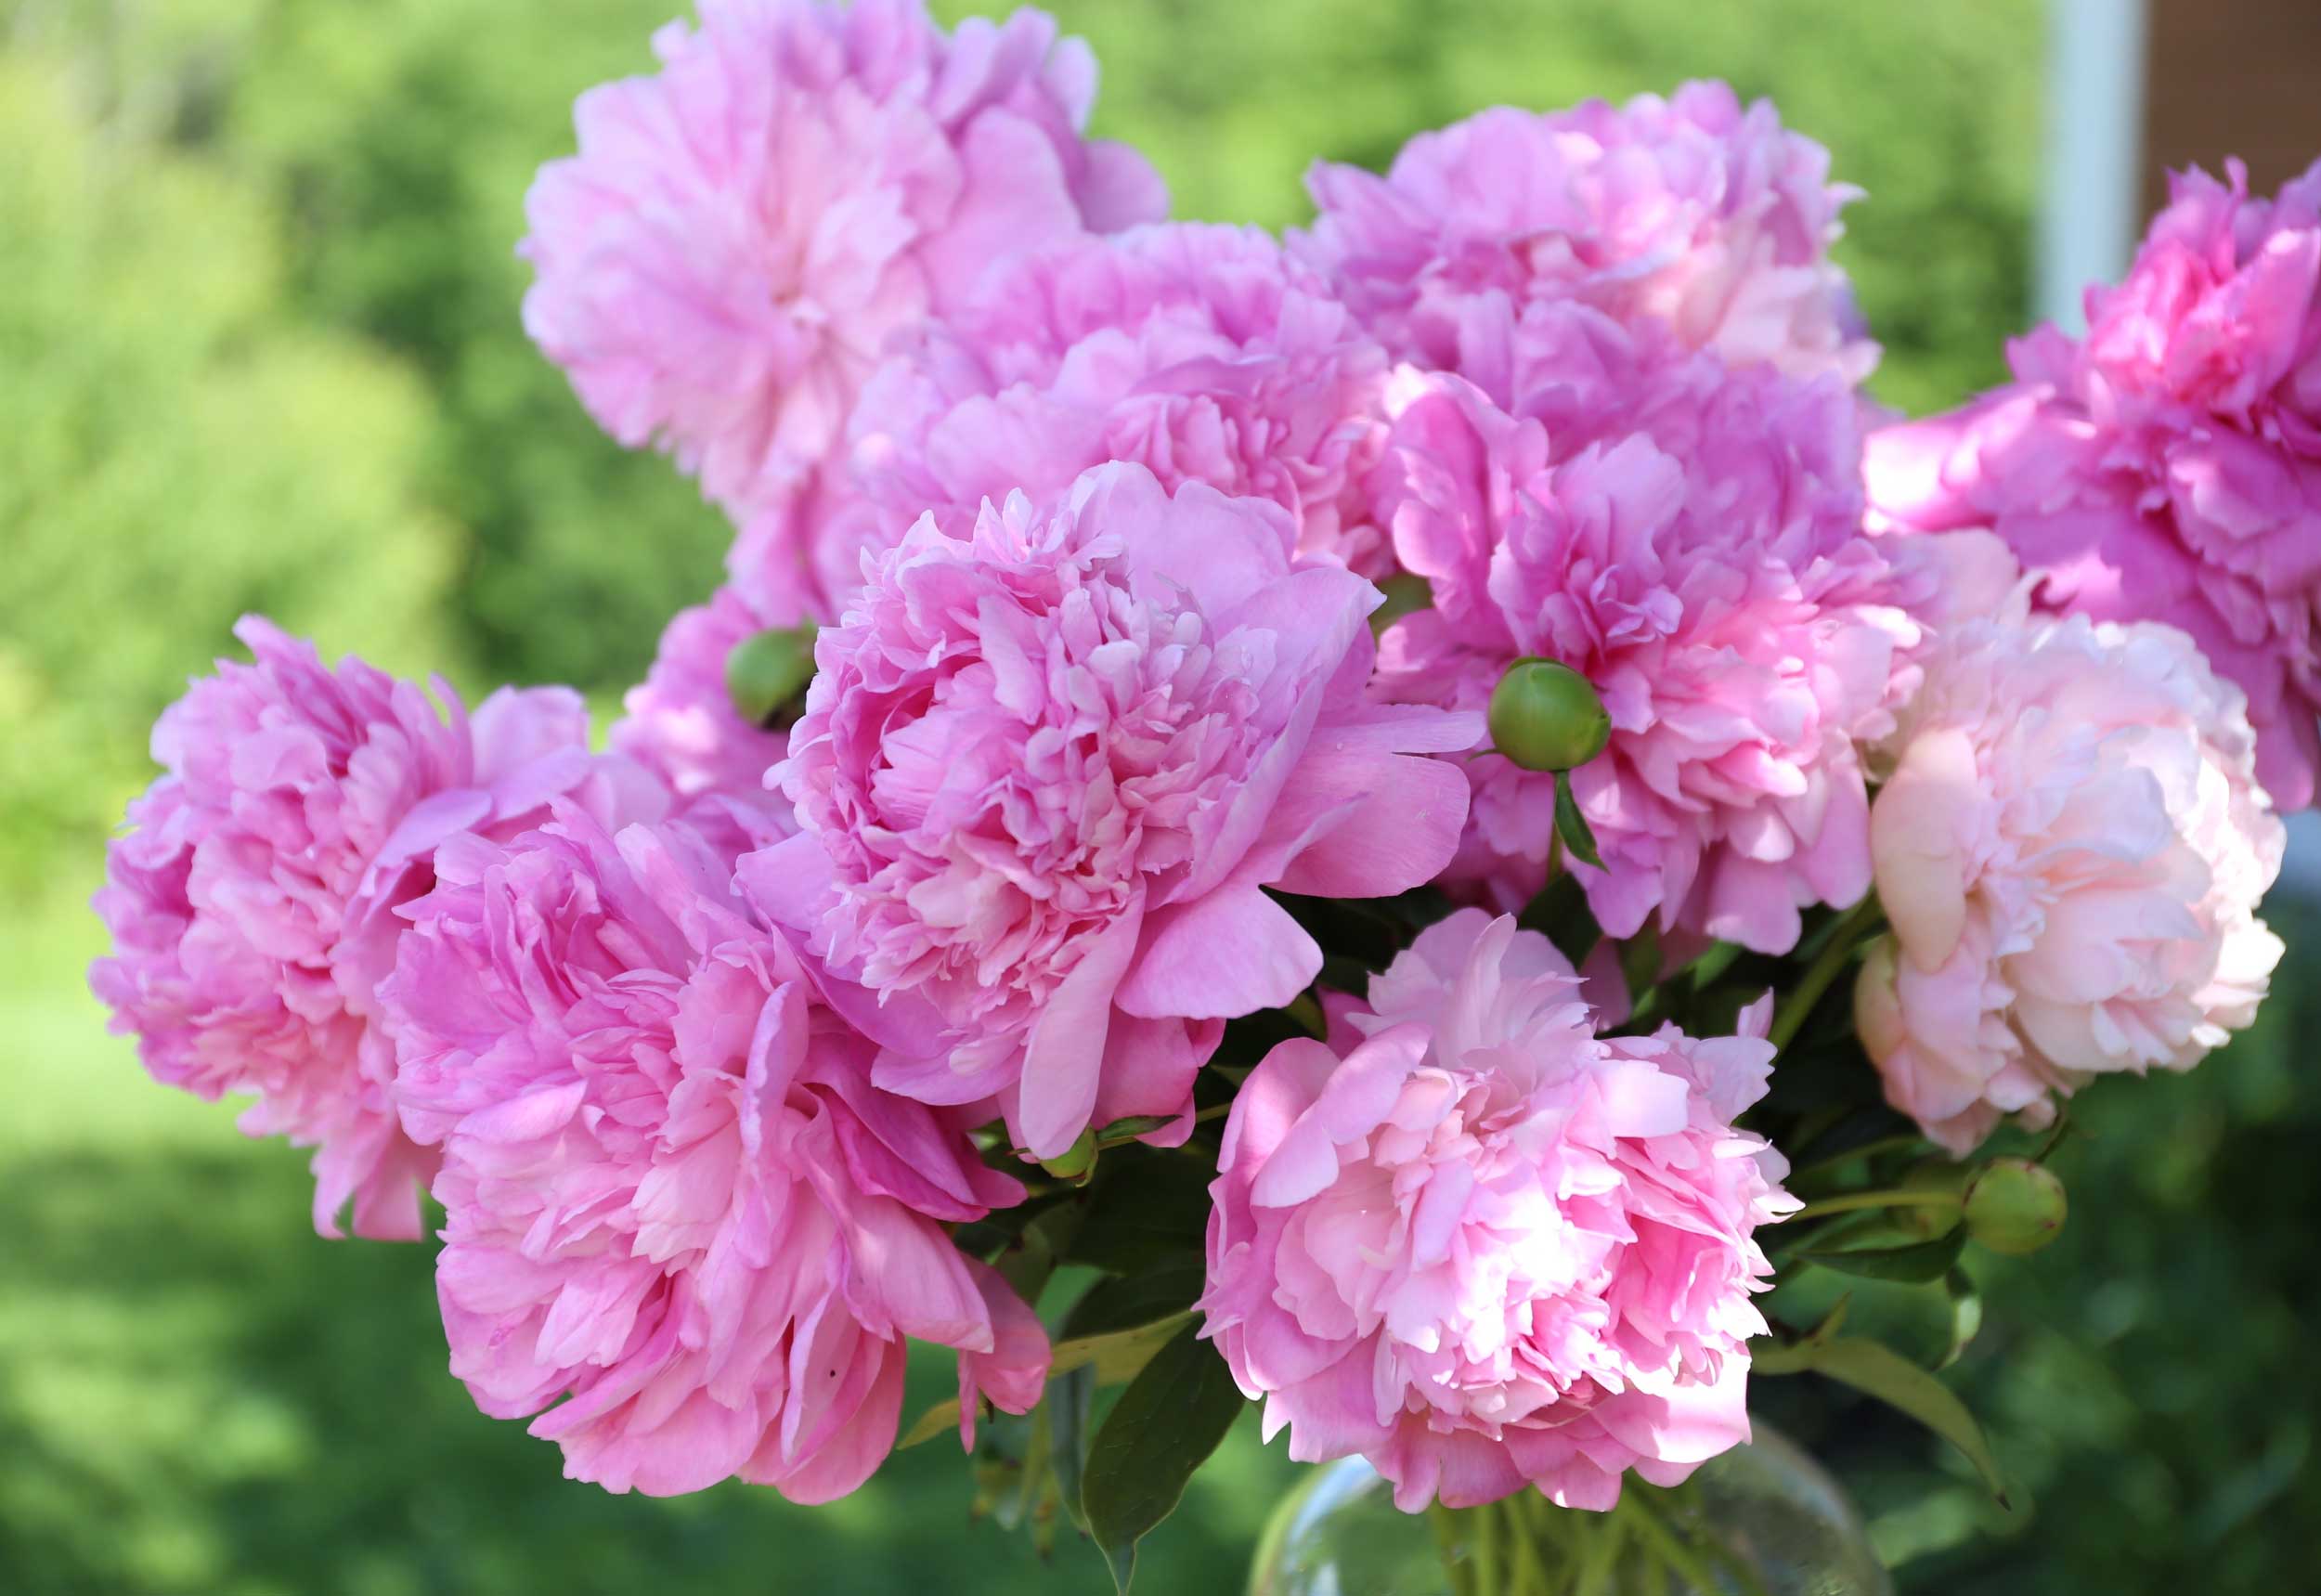 All About Peonies